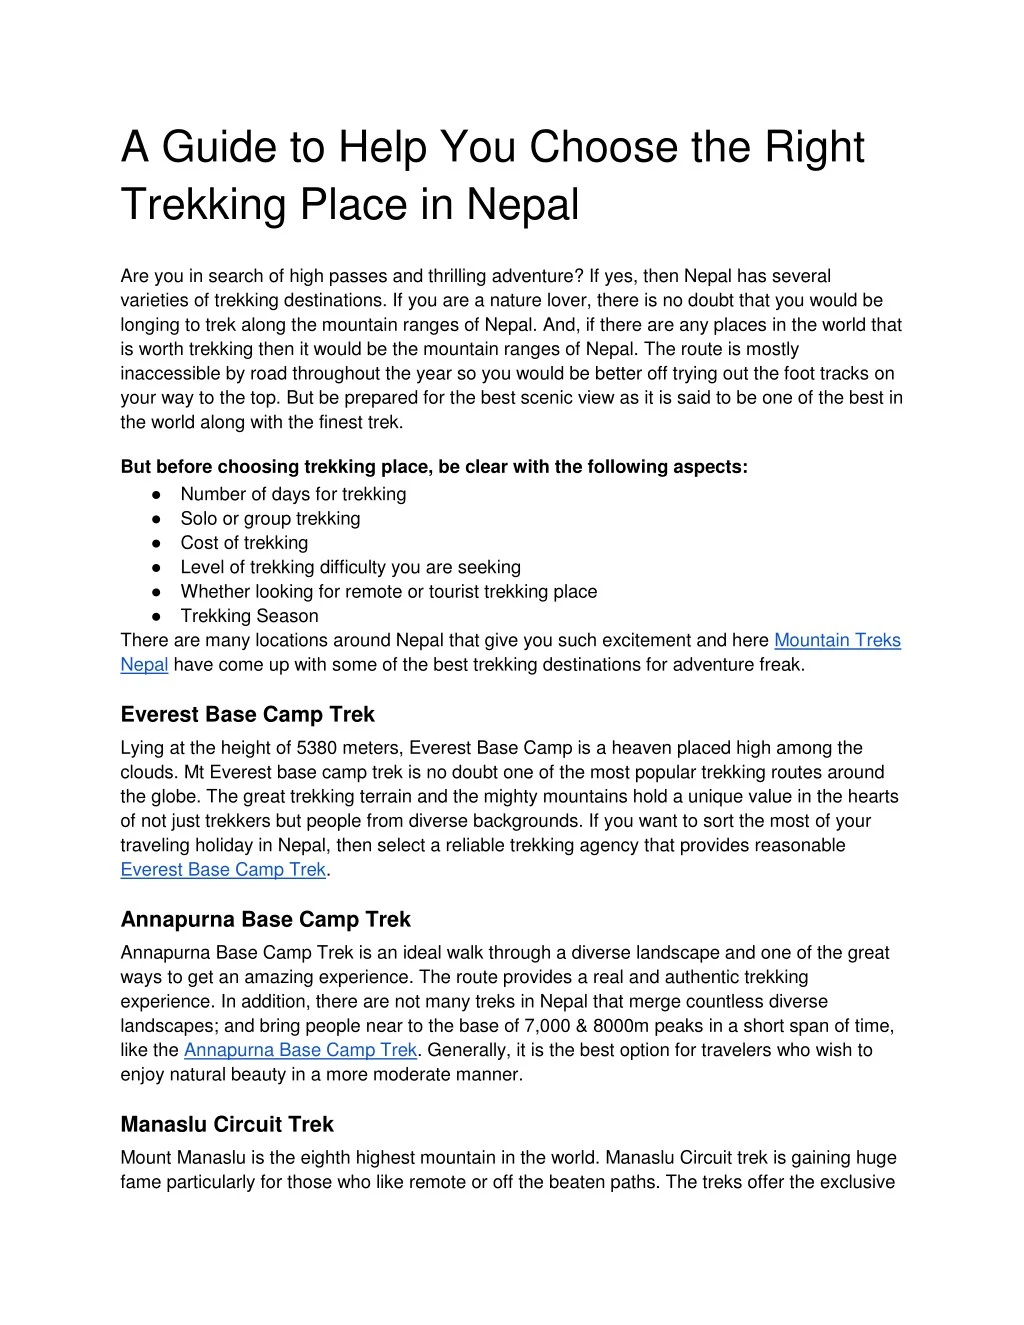 a guide to help you choose the right trekking